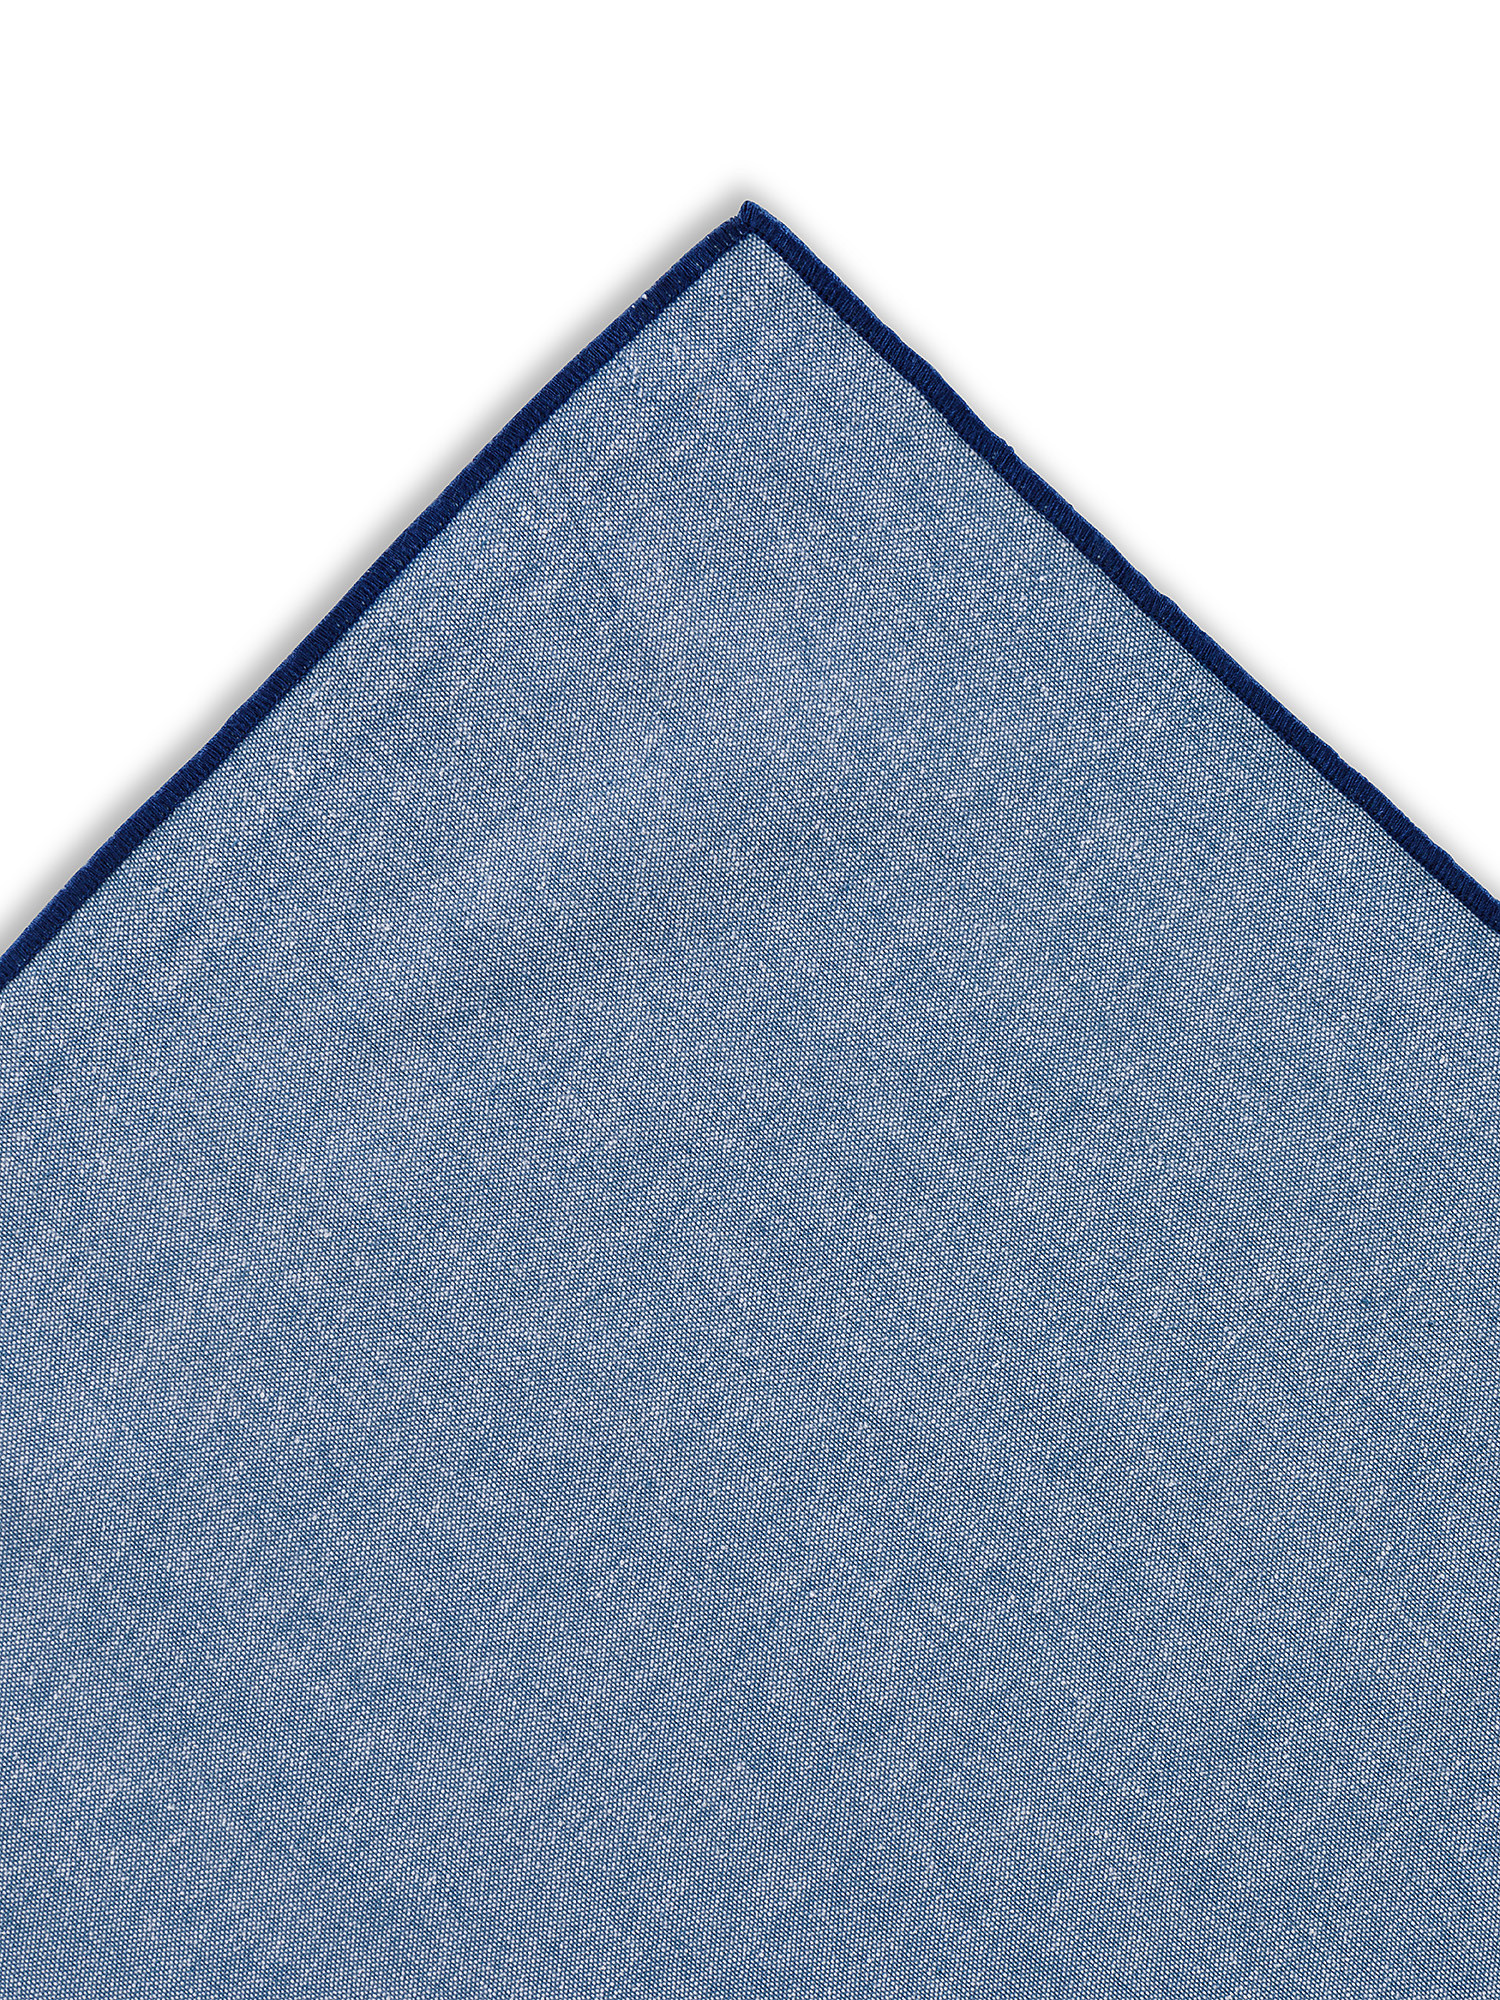 Chambre cotton centerpiece with contrasting hem, Blue, large image number 1